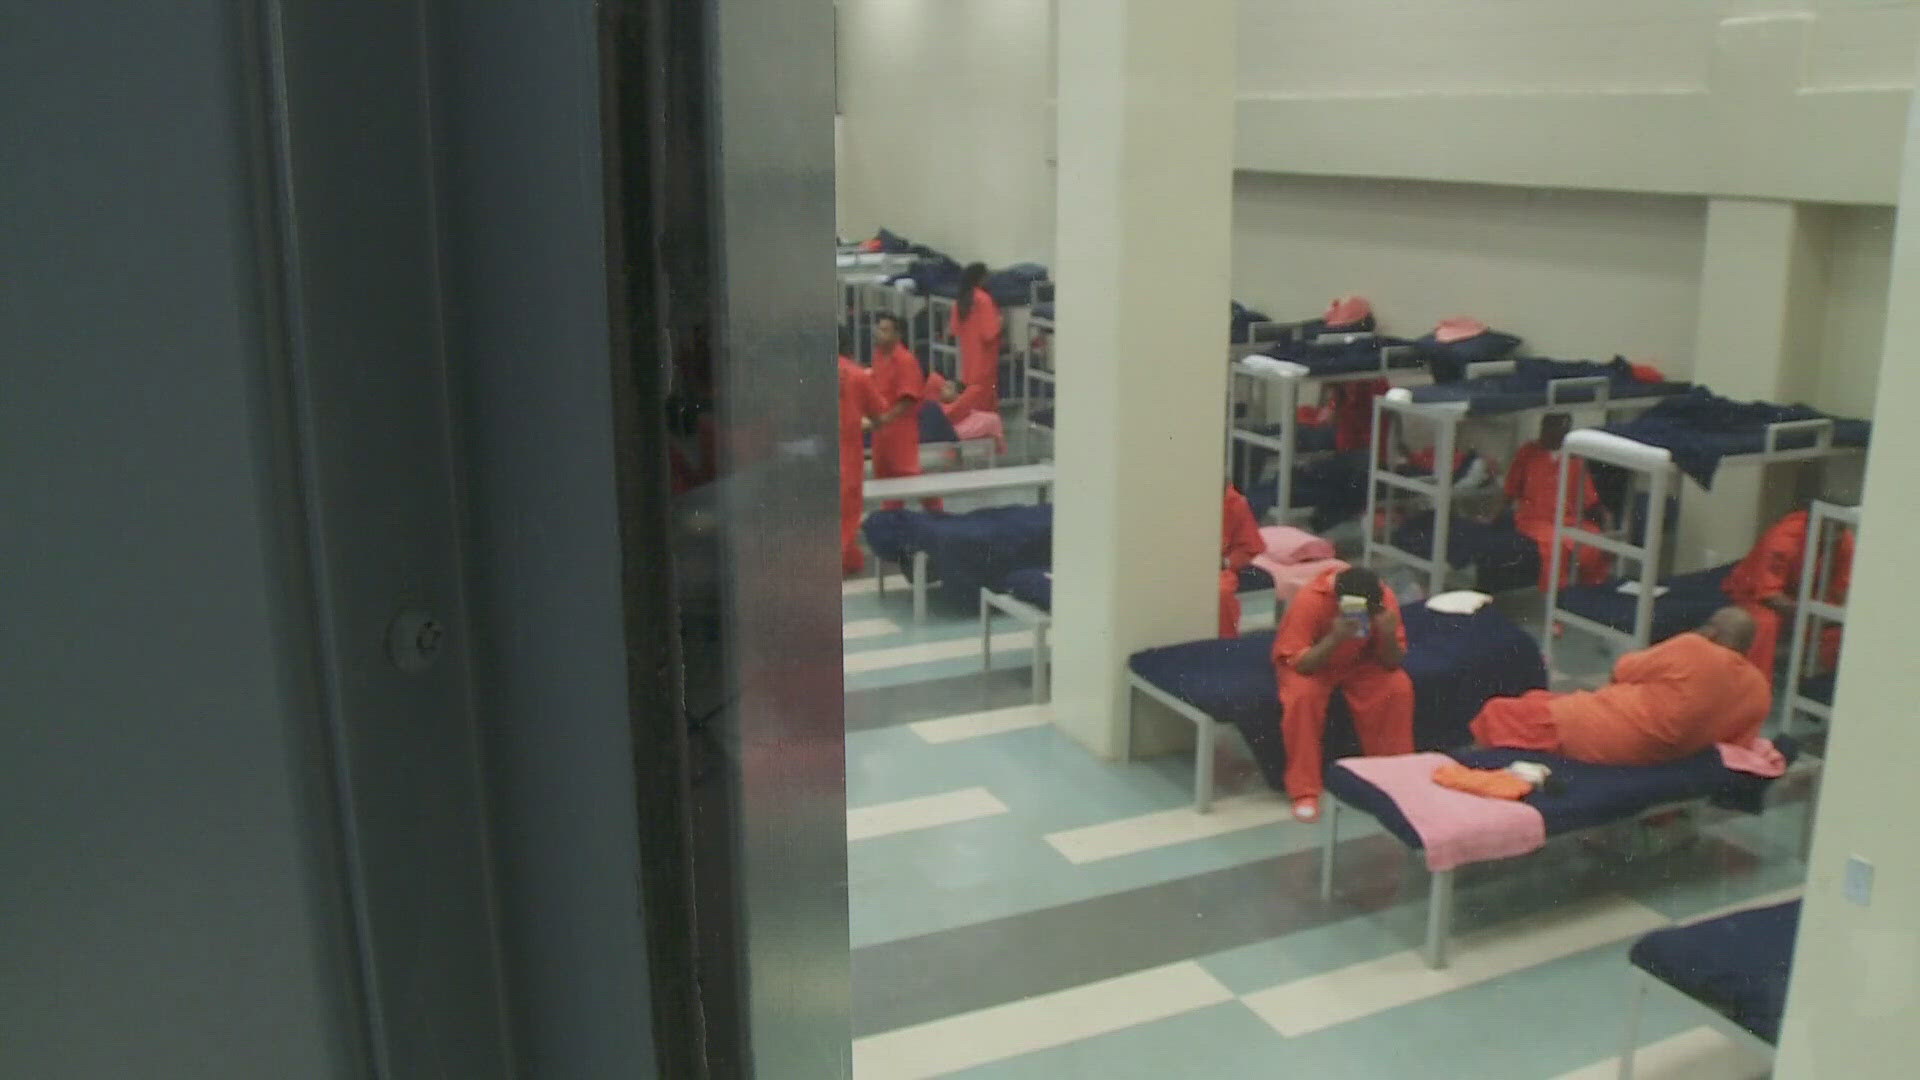 Currently, 13 juveniles are being held in Orleans Parish Jail.